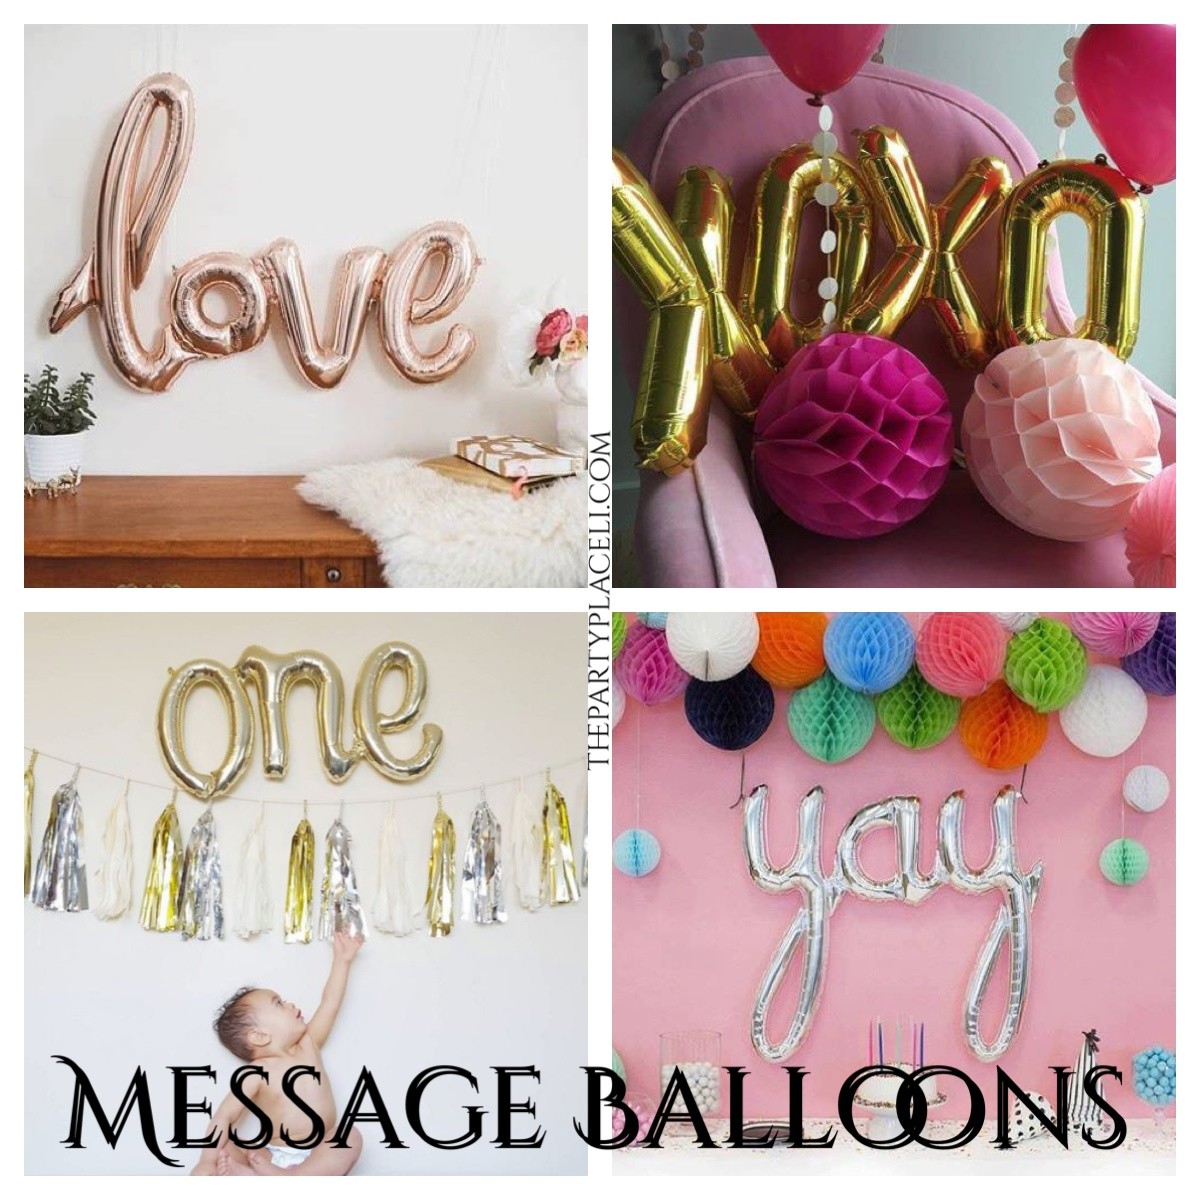 Message balloons